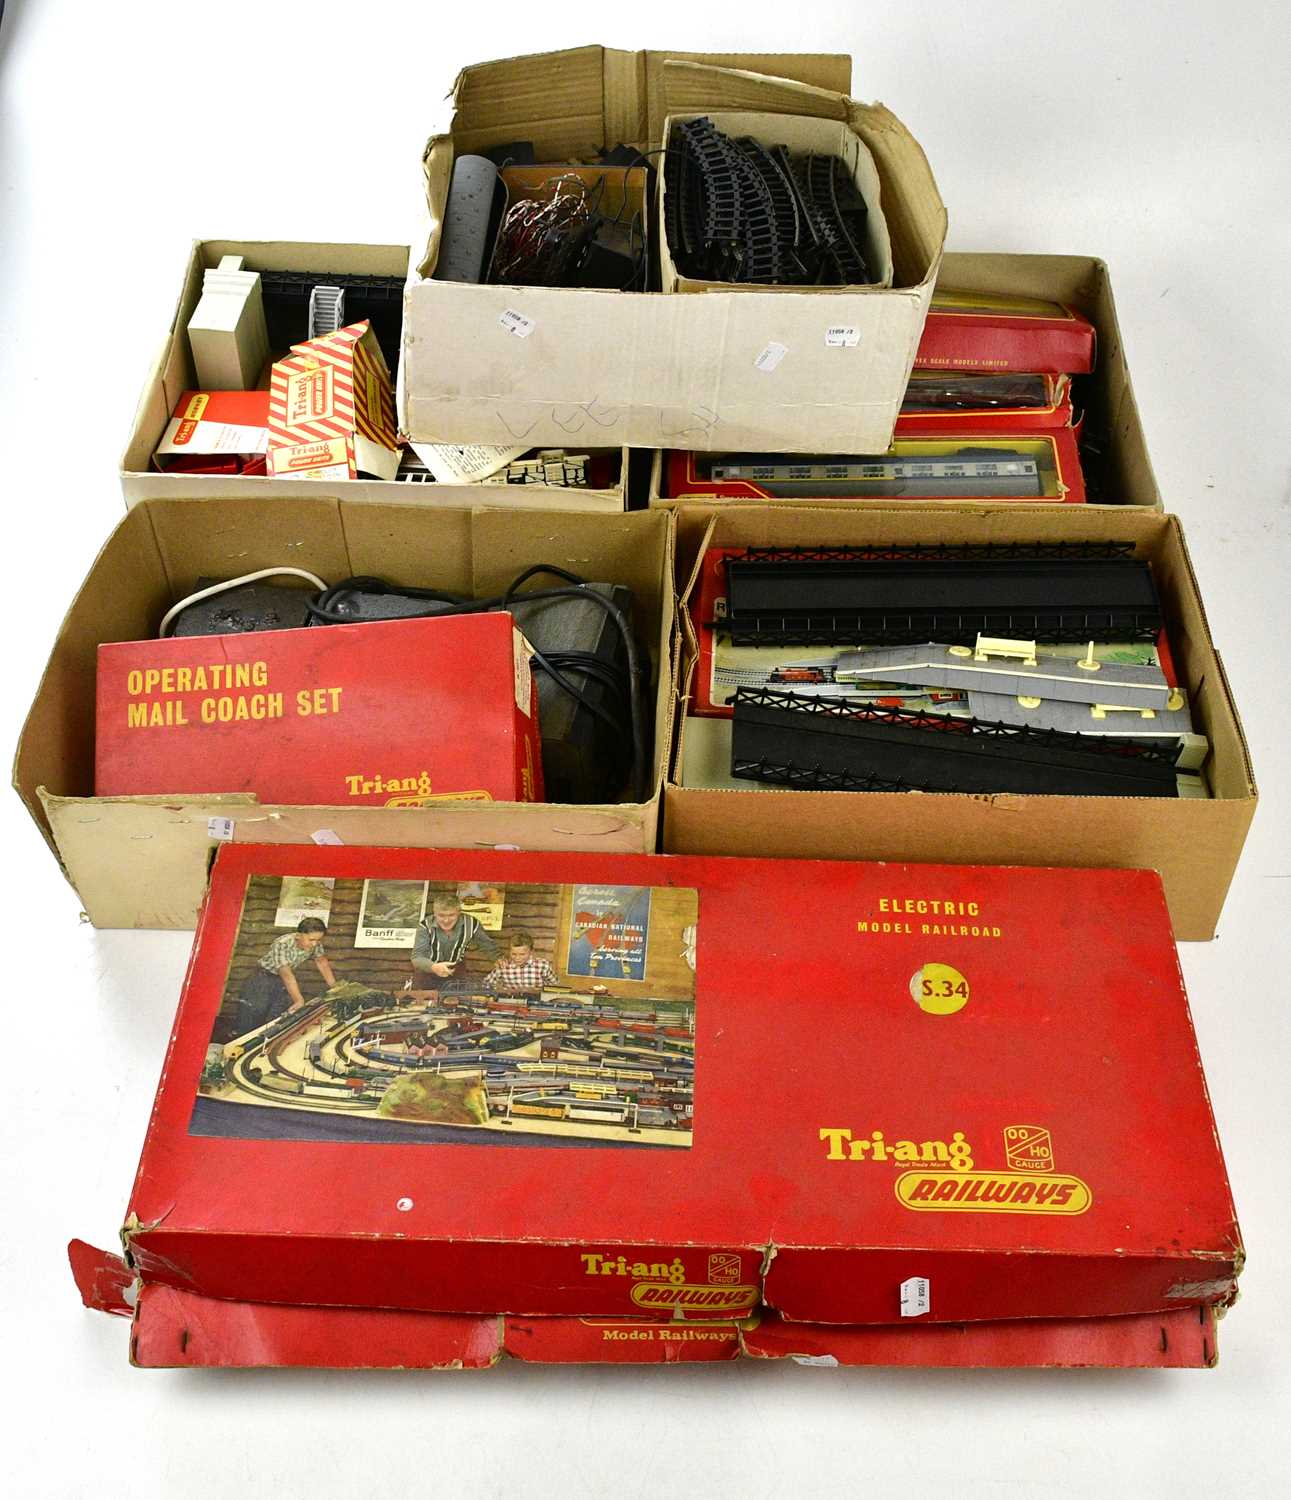 TRI-ANG; a boxed RS34 OO/HO gauge train set, Tri-ang Hornby electric train set, mail coach, assorted